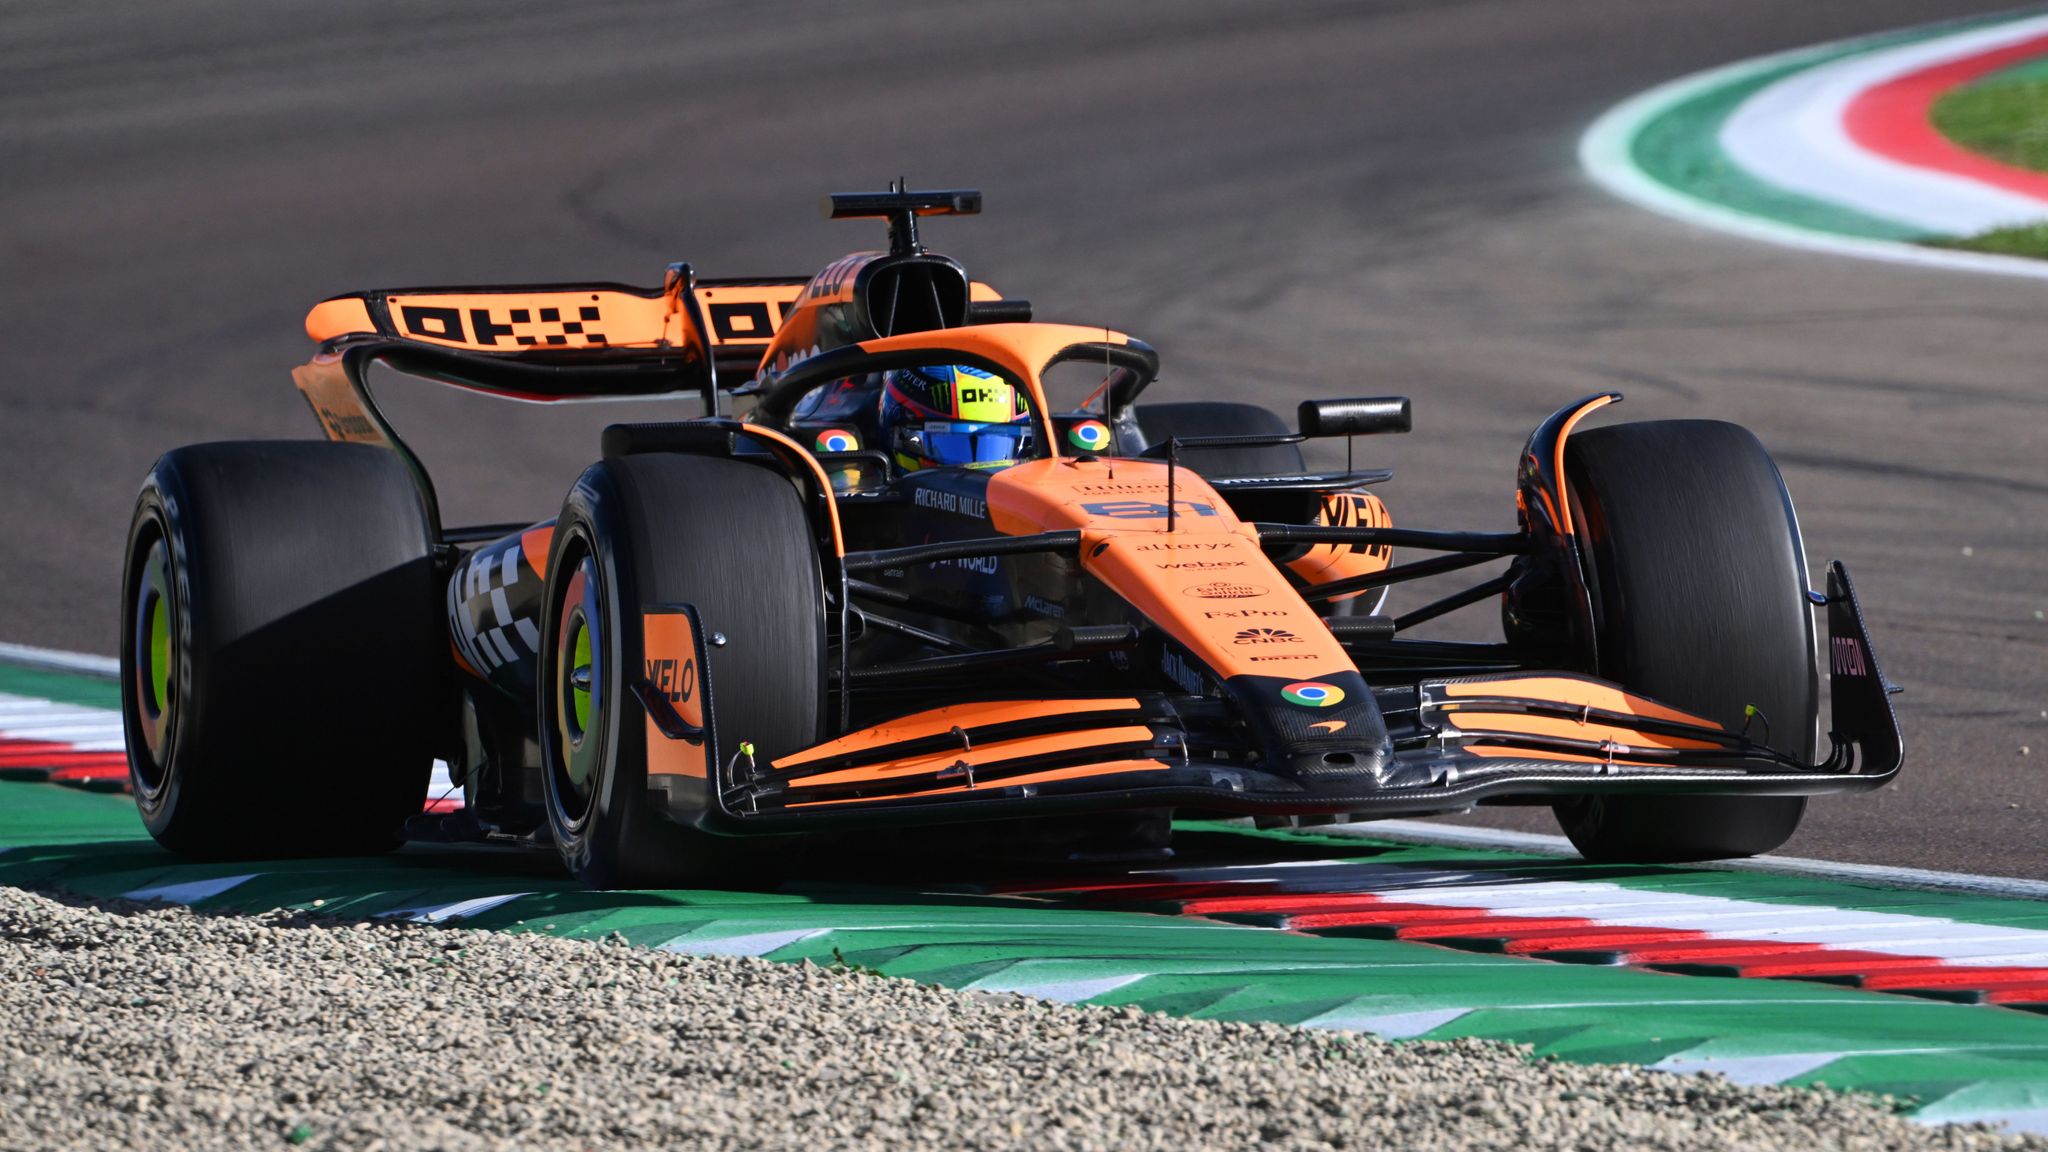 Alonso and Perez Crash in FP3 as McLaren Emerges Fastest at Imola